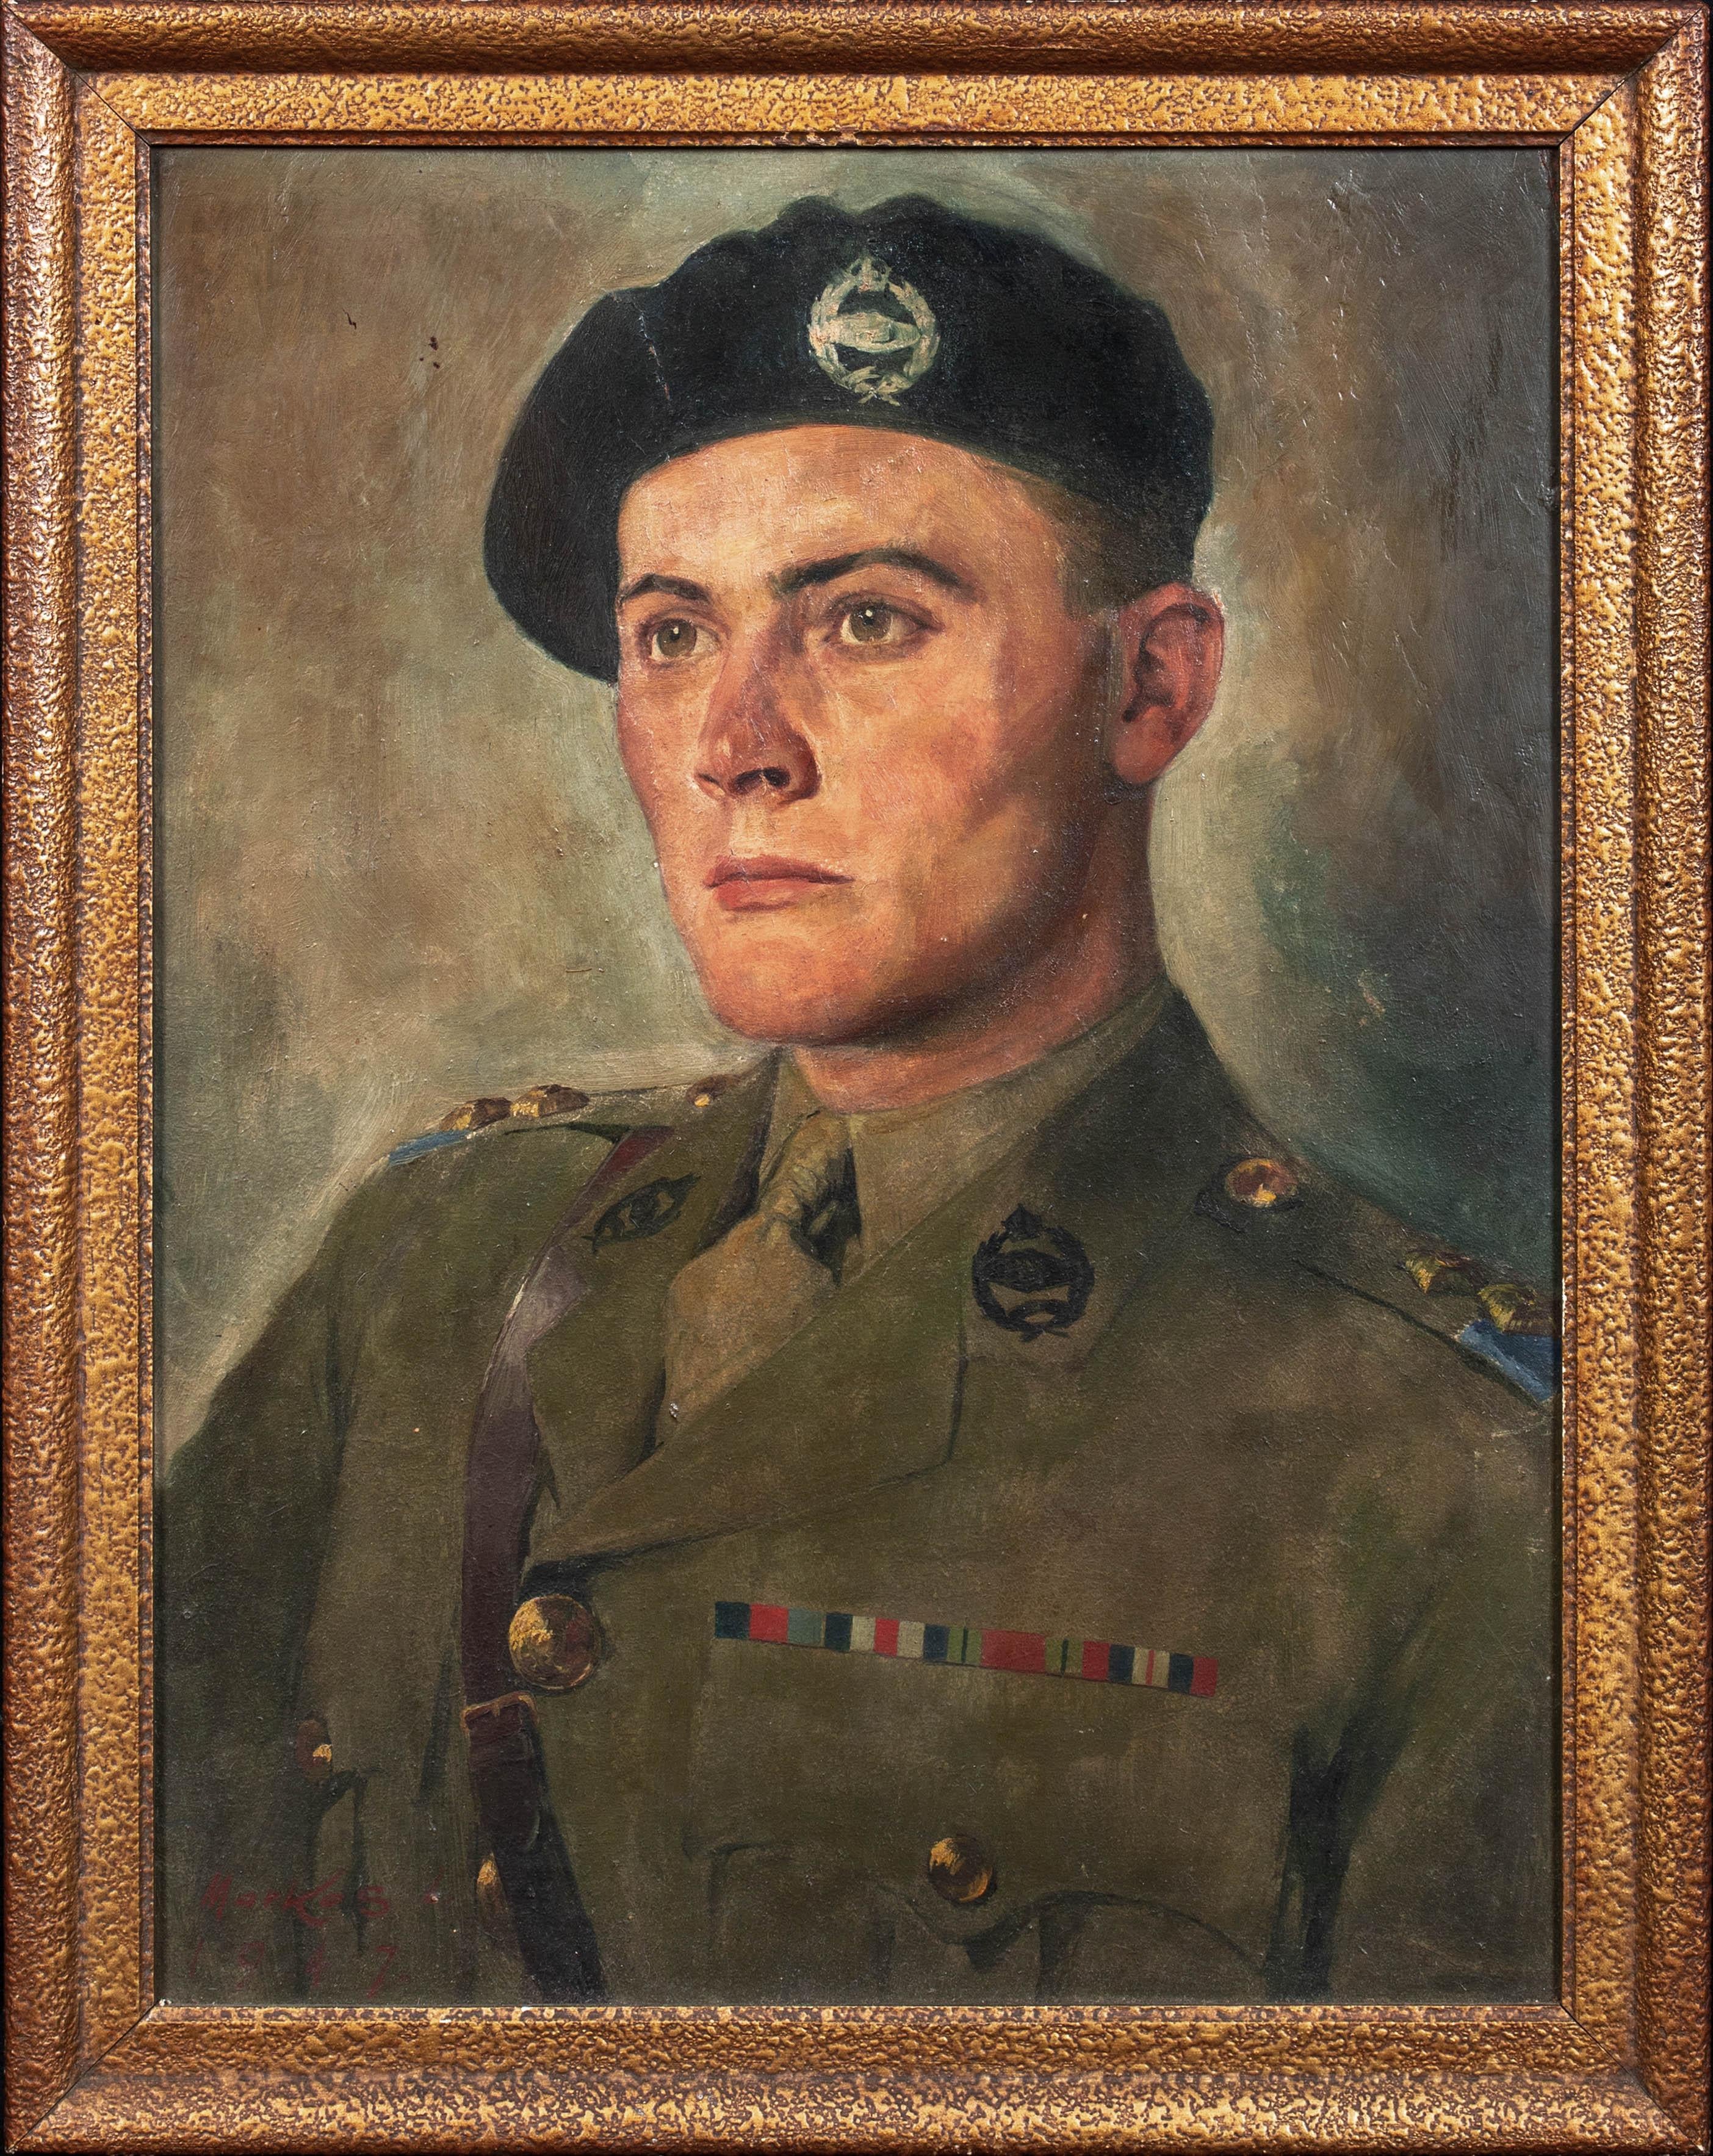 Unknown Portrait Painting - Portrait of A Tank Officer, circa 1940